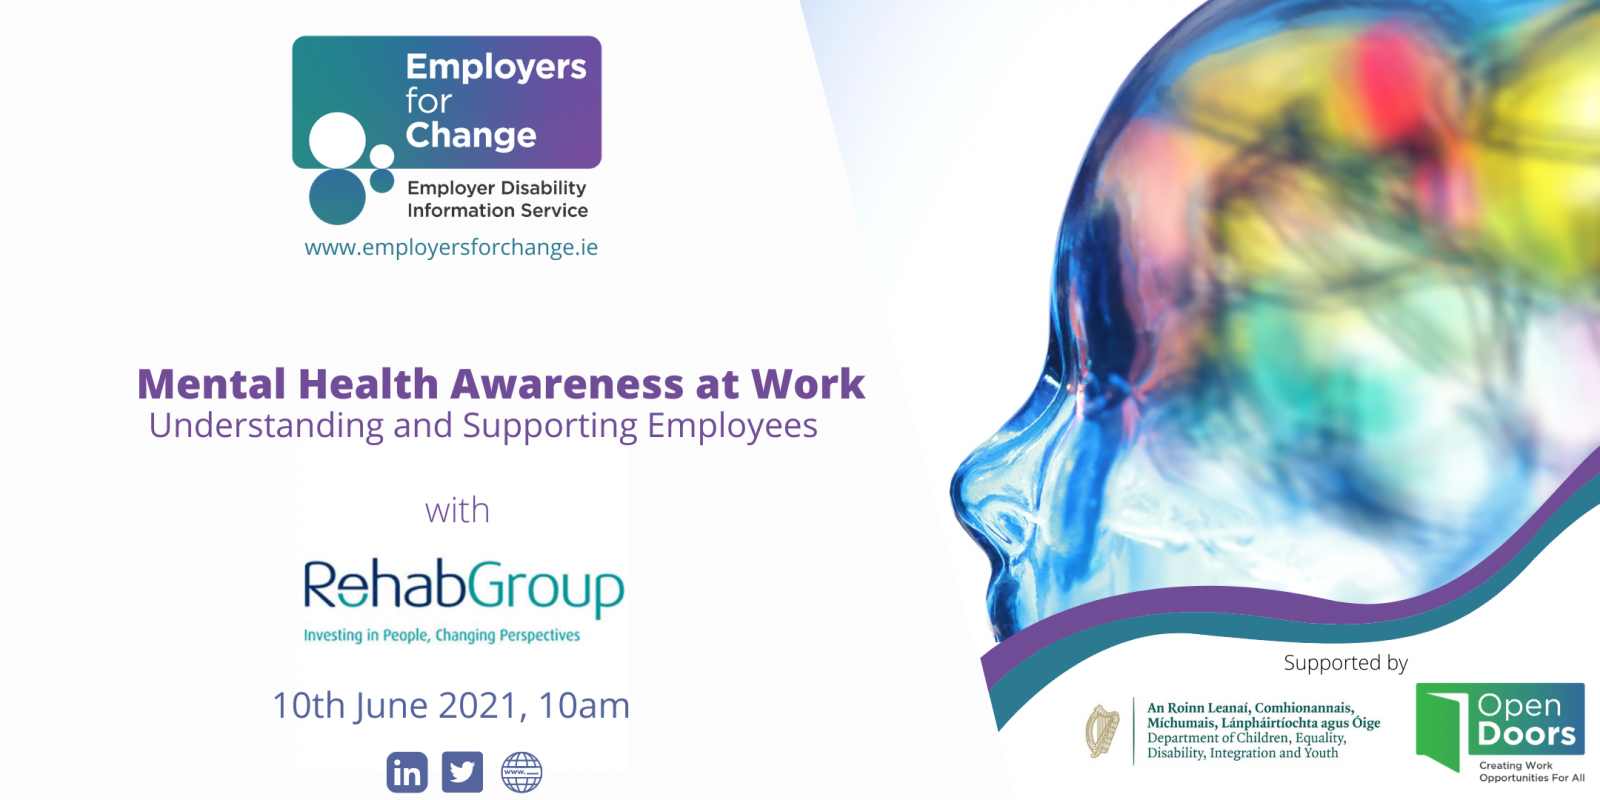 Mental Health Awareness at Work: Understanding and Supporting Employees with Rehab Group on 10th June at 10am with Employers for Change. Supported by Department of Children, Equality, Disability, Integration and Youth and the Open Doors Initiative